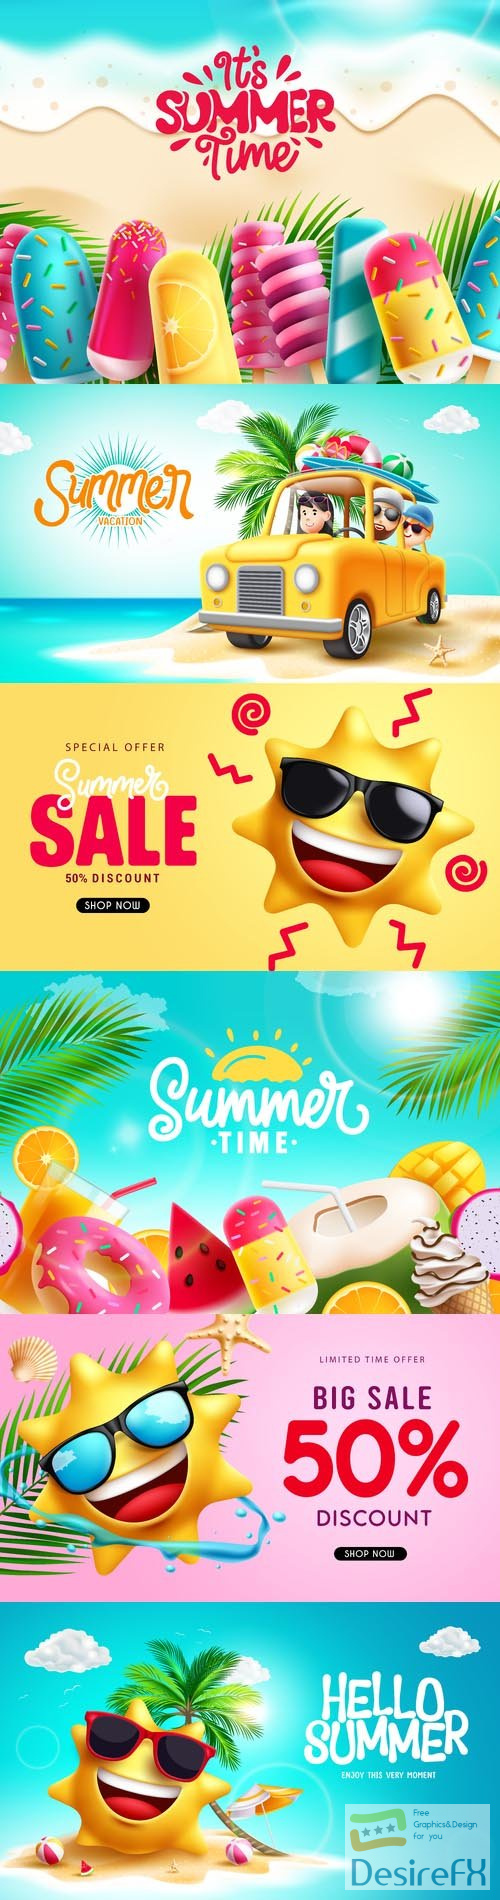 Summer time vector design background, summer text in empty space with tropical season food